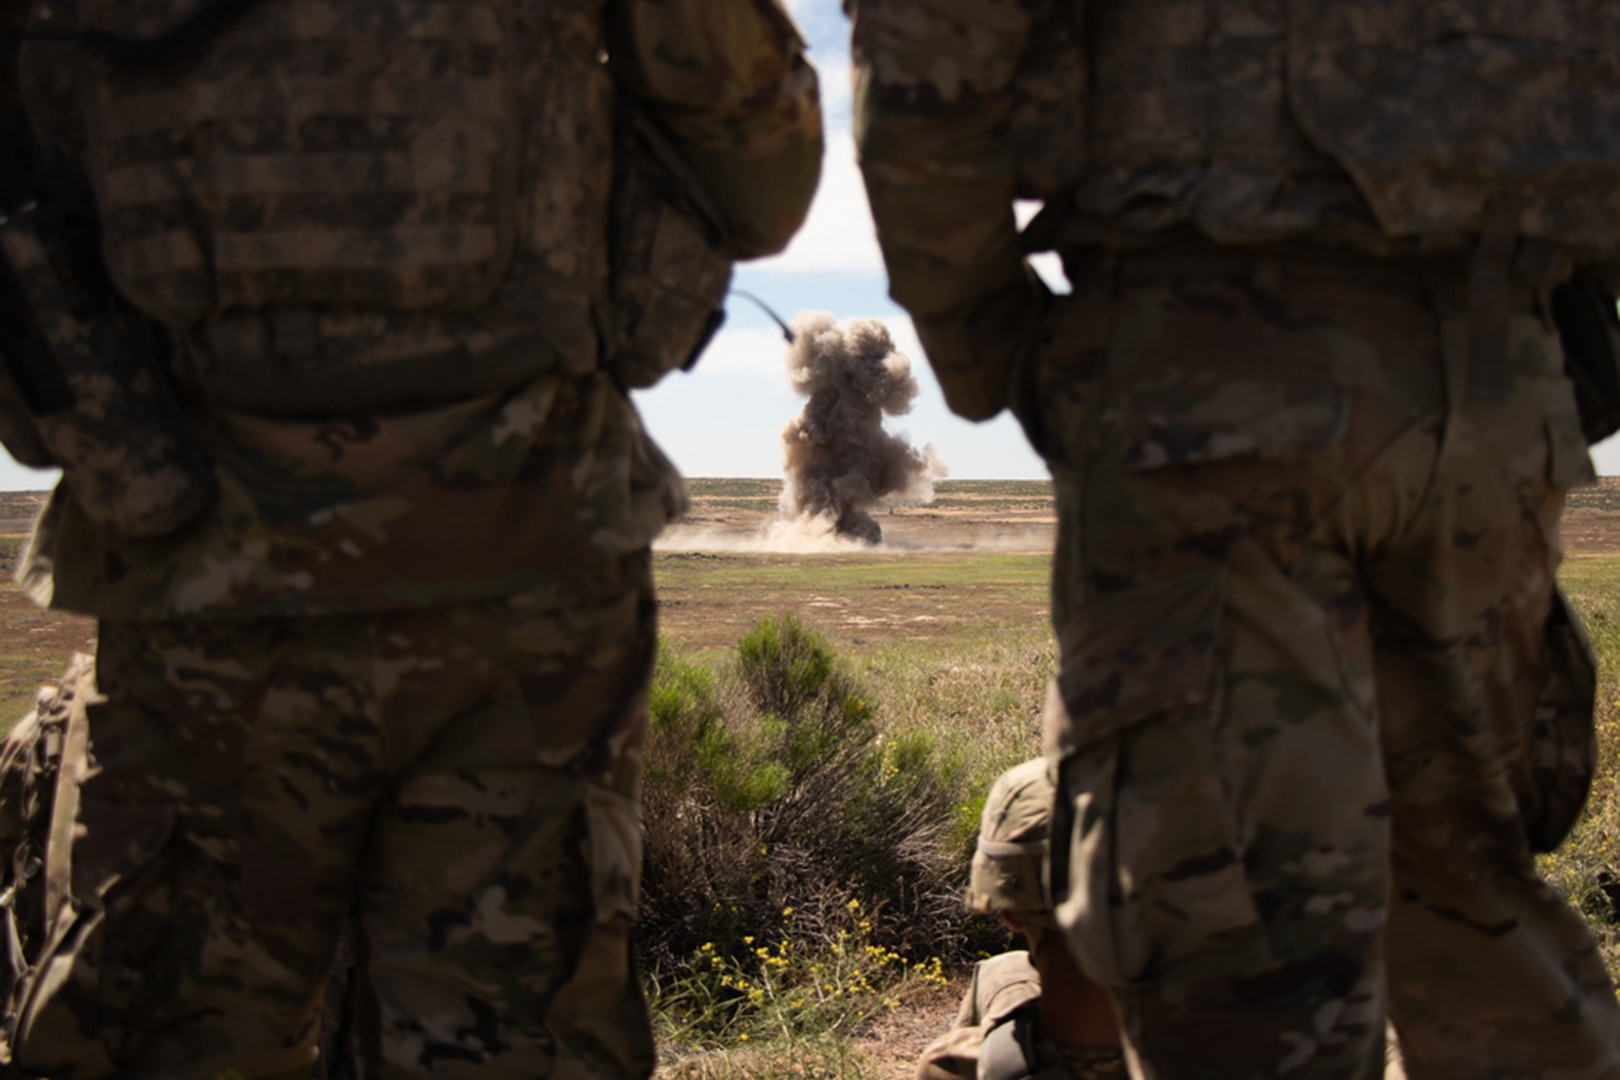 Combat engineers with the Iowa National Guard’s 833rd Engineer Company out of Ottumwa, Iowa, watch an explosion from a safe distance on a demolition range at Orchard Combat Training Center near Boise, Idaho, June 10, 2022. The Soldiers traveled to Idaho to take part in an exportable combat training capabilities exercise, or XCTC, called Western Strike.